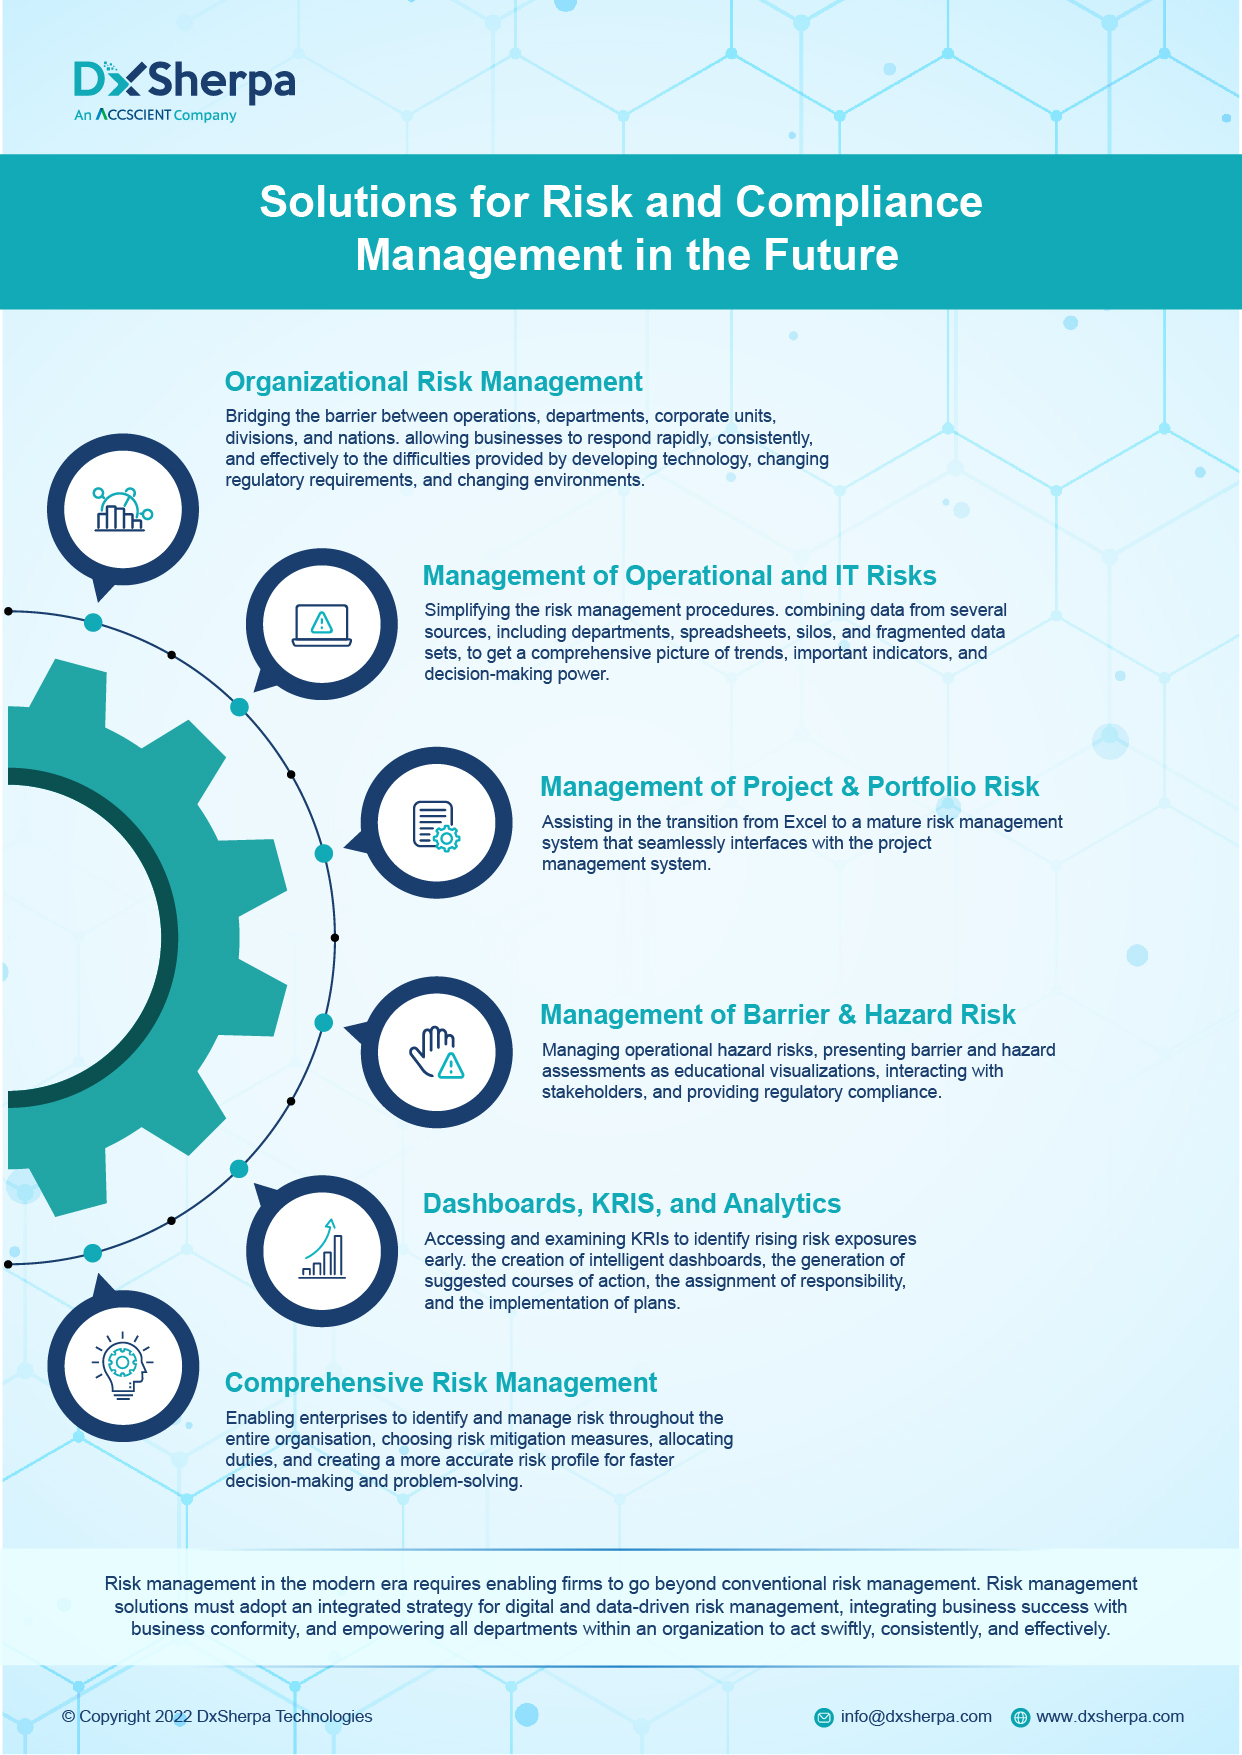 Solutions for Risk and Compliance Management in the Future